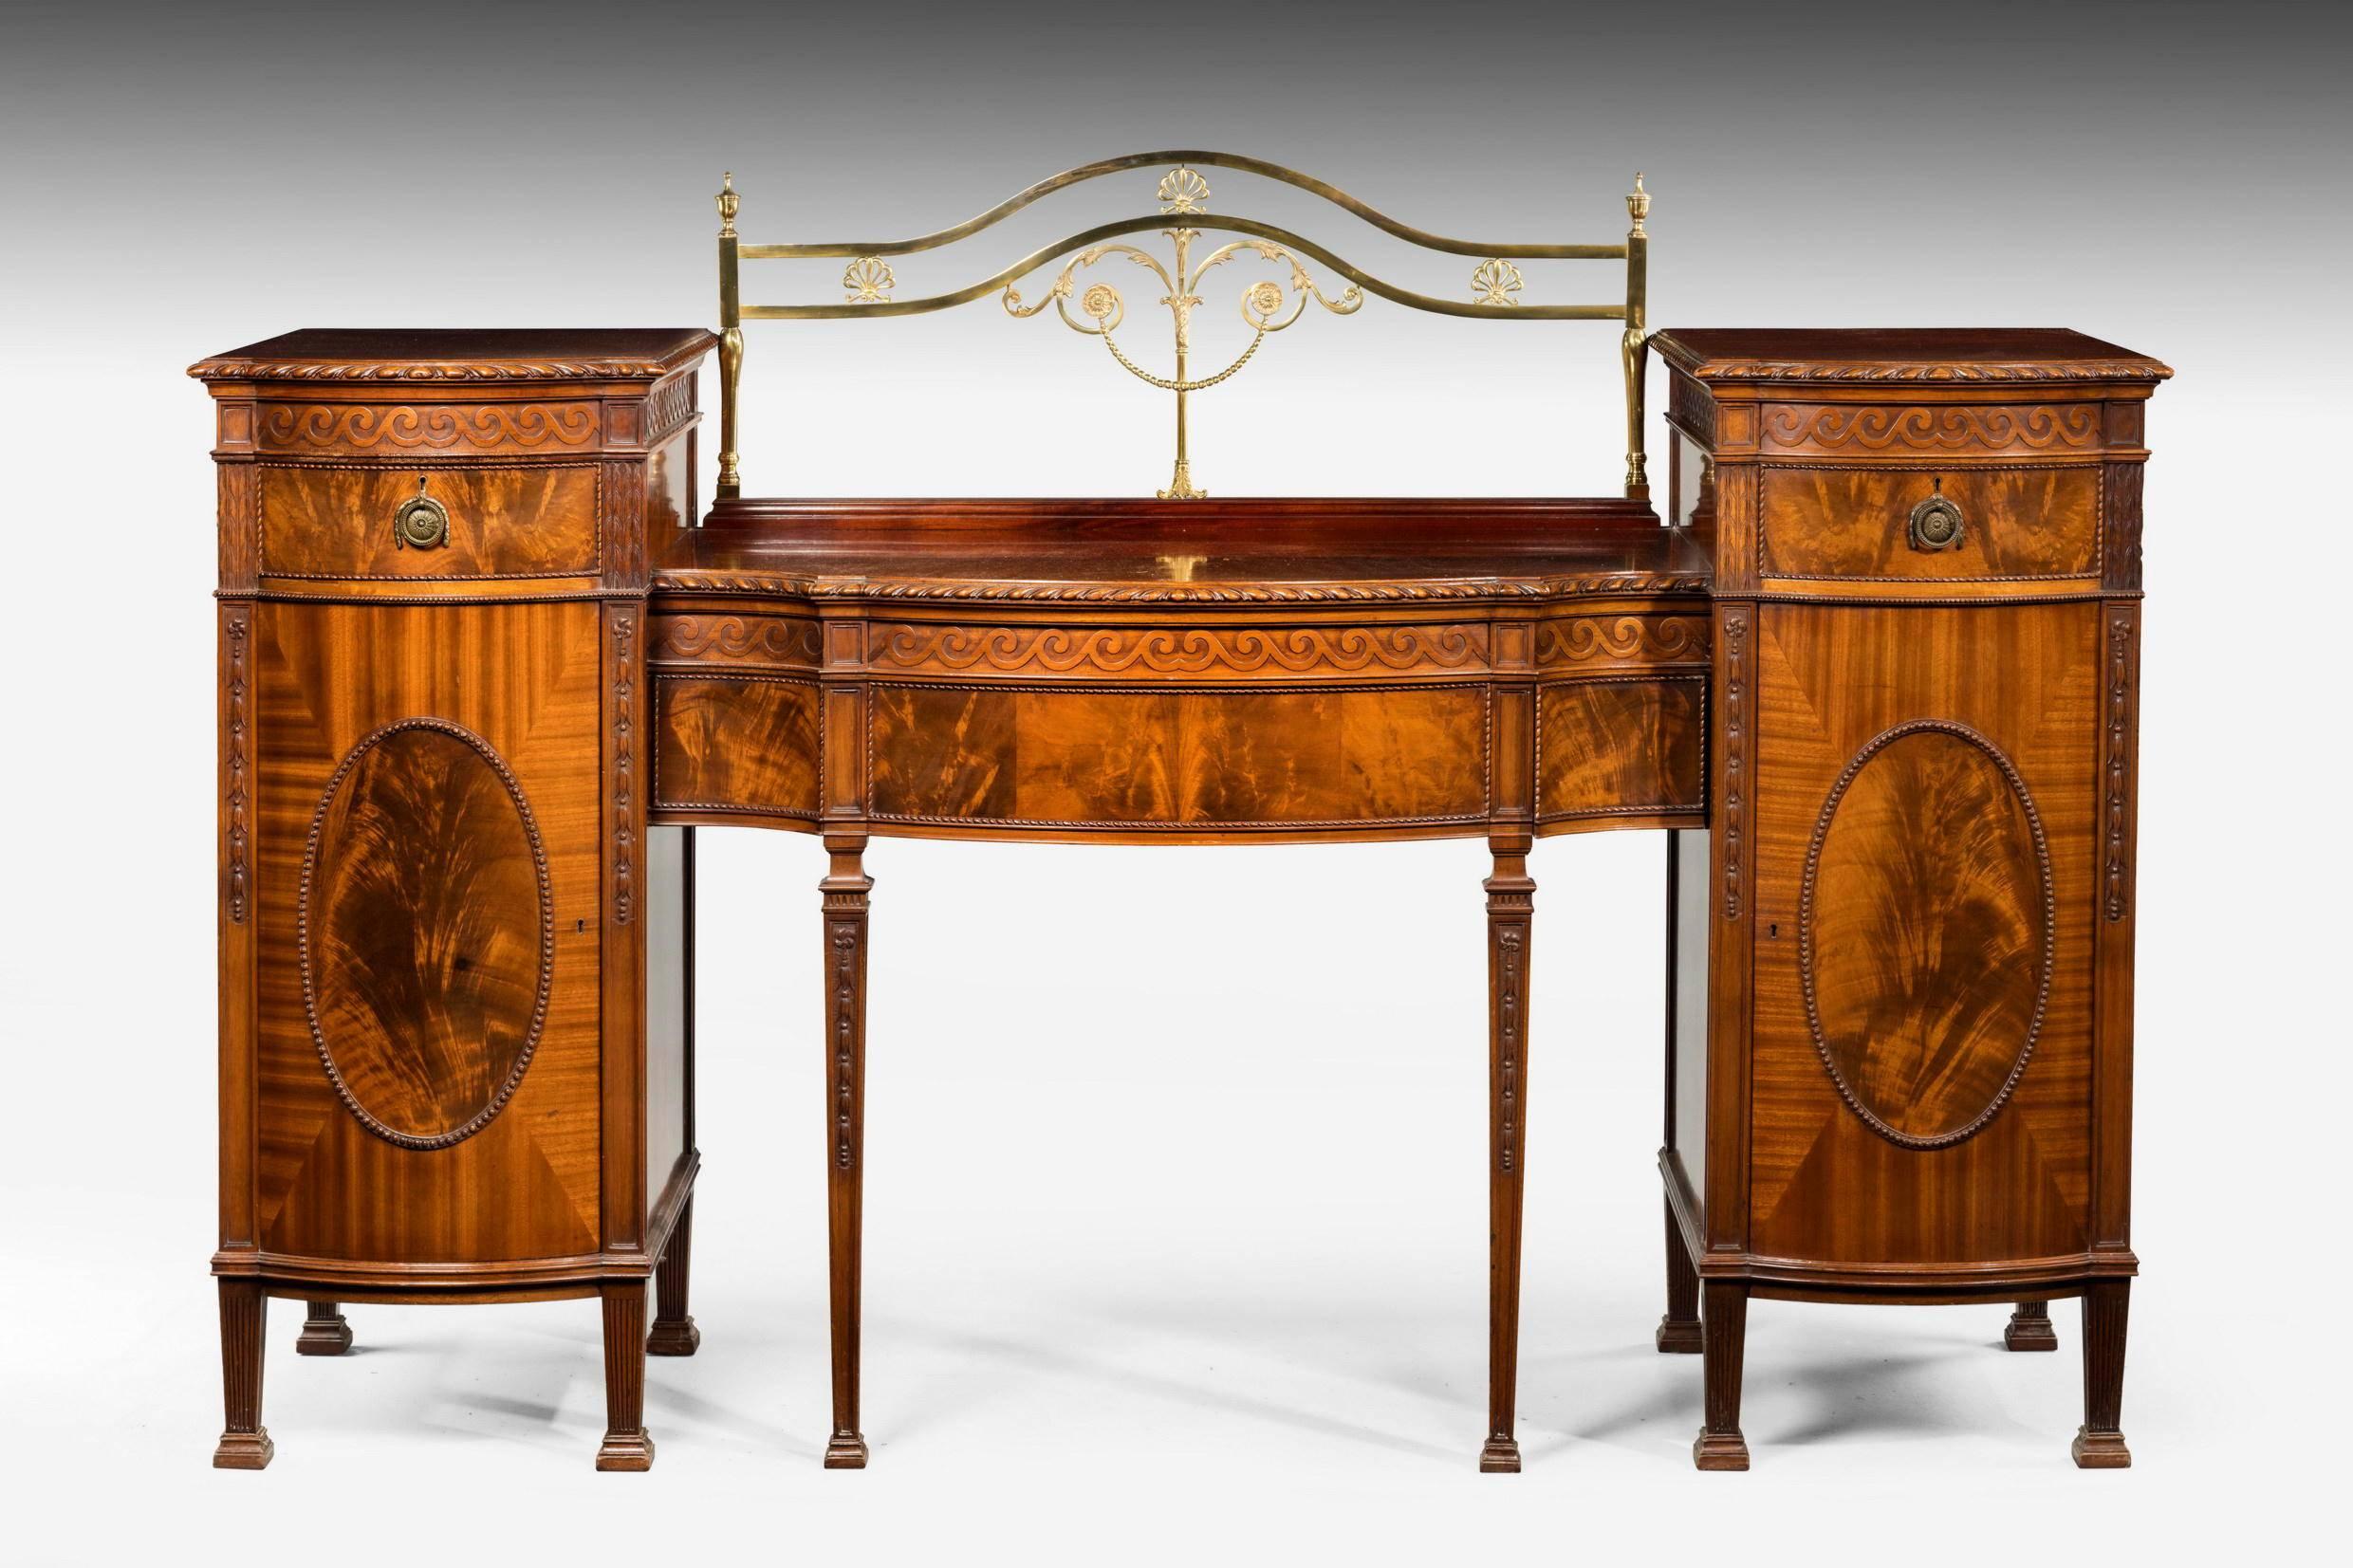 A very good quality Adam style mahogany sideboard. Brass gallery and a drop centre and bode corners. Stamped Hobbs & Company London.

Alfred Charles Hobbs was born on October 7th, 1812 in Boston. When Alfred was only three years old his farther